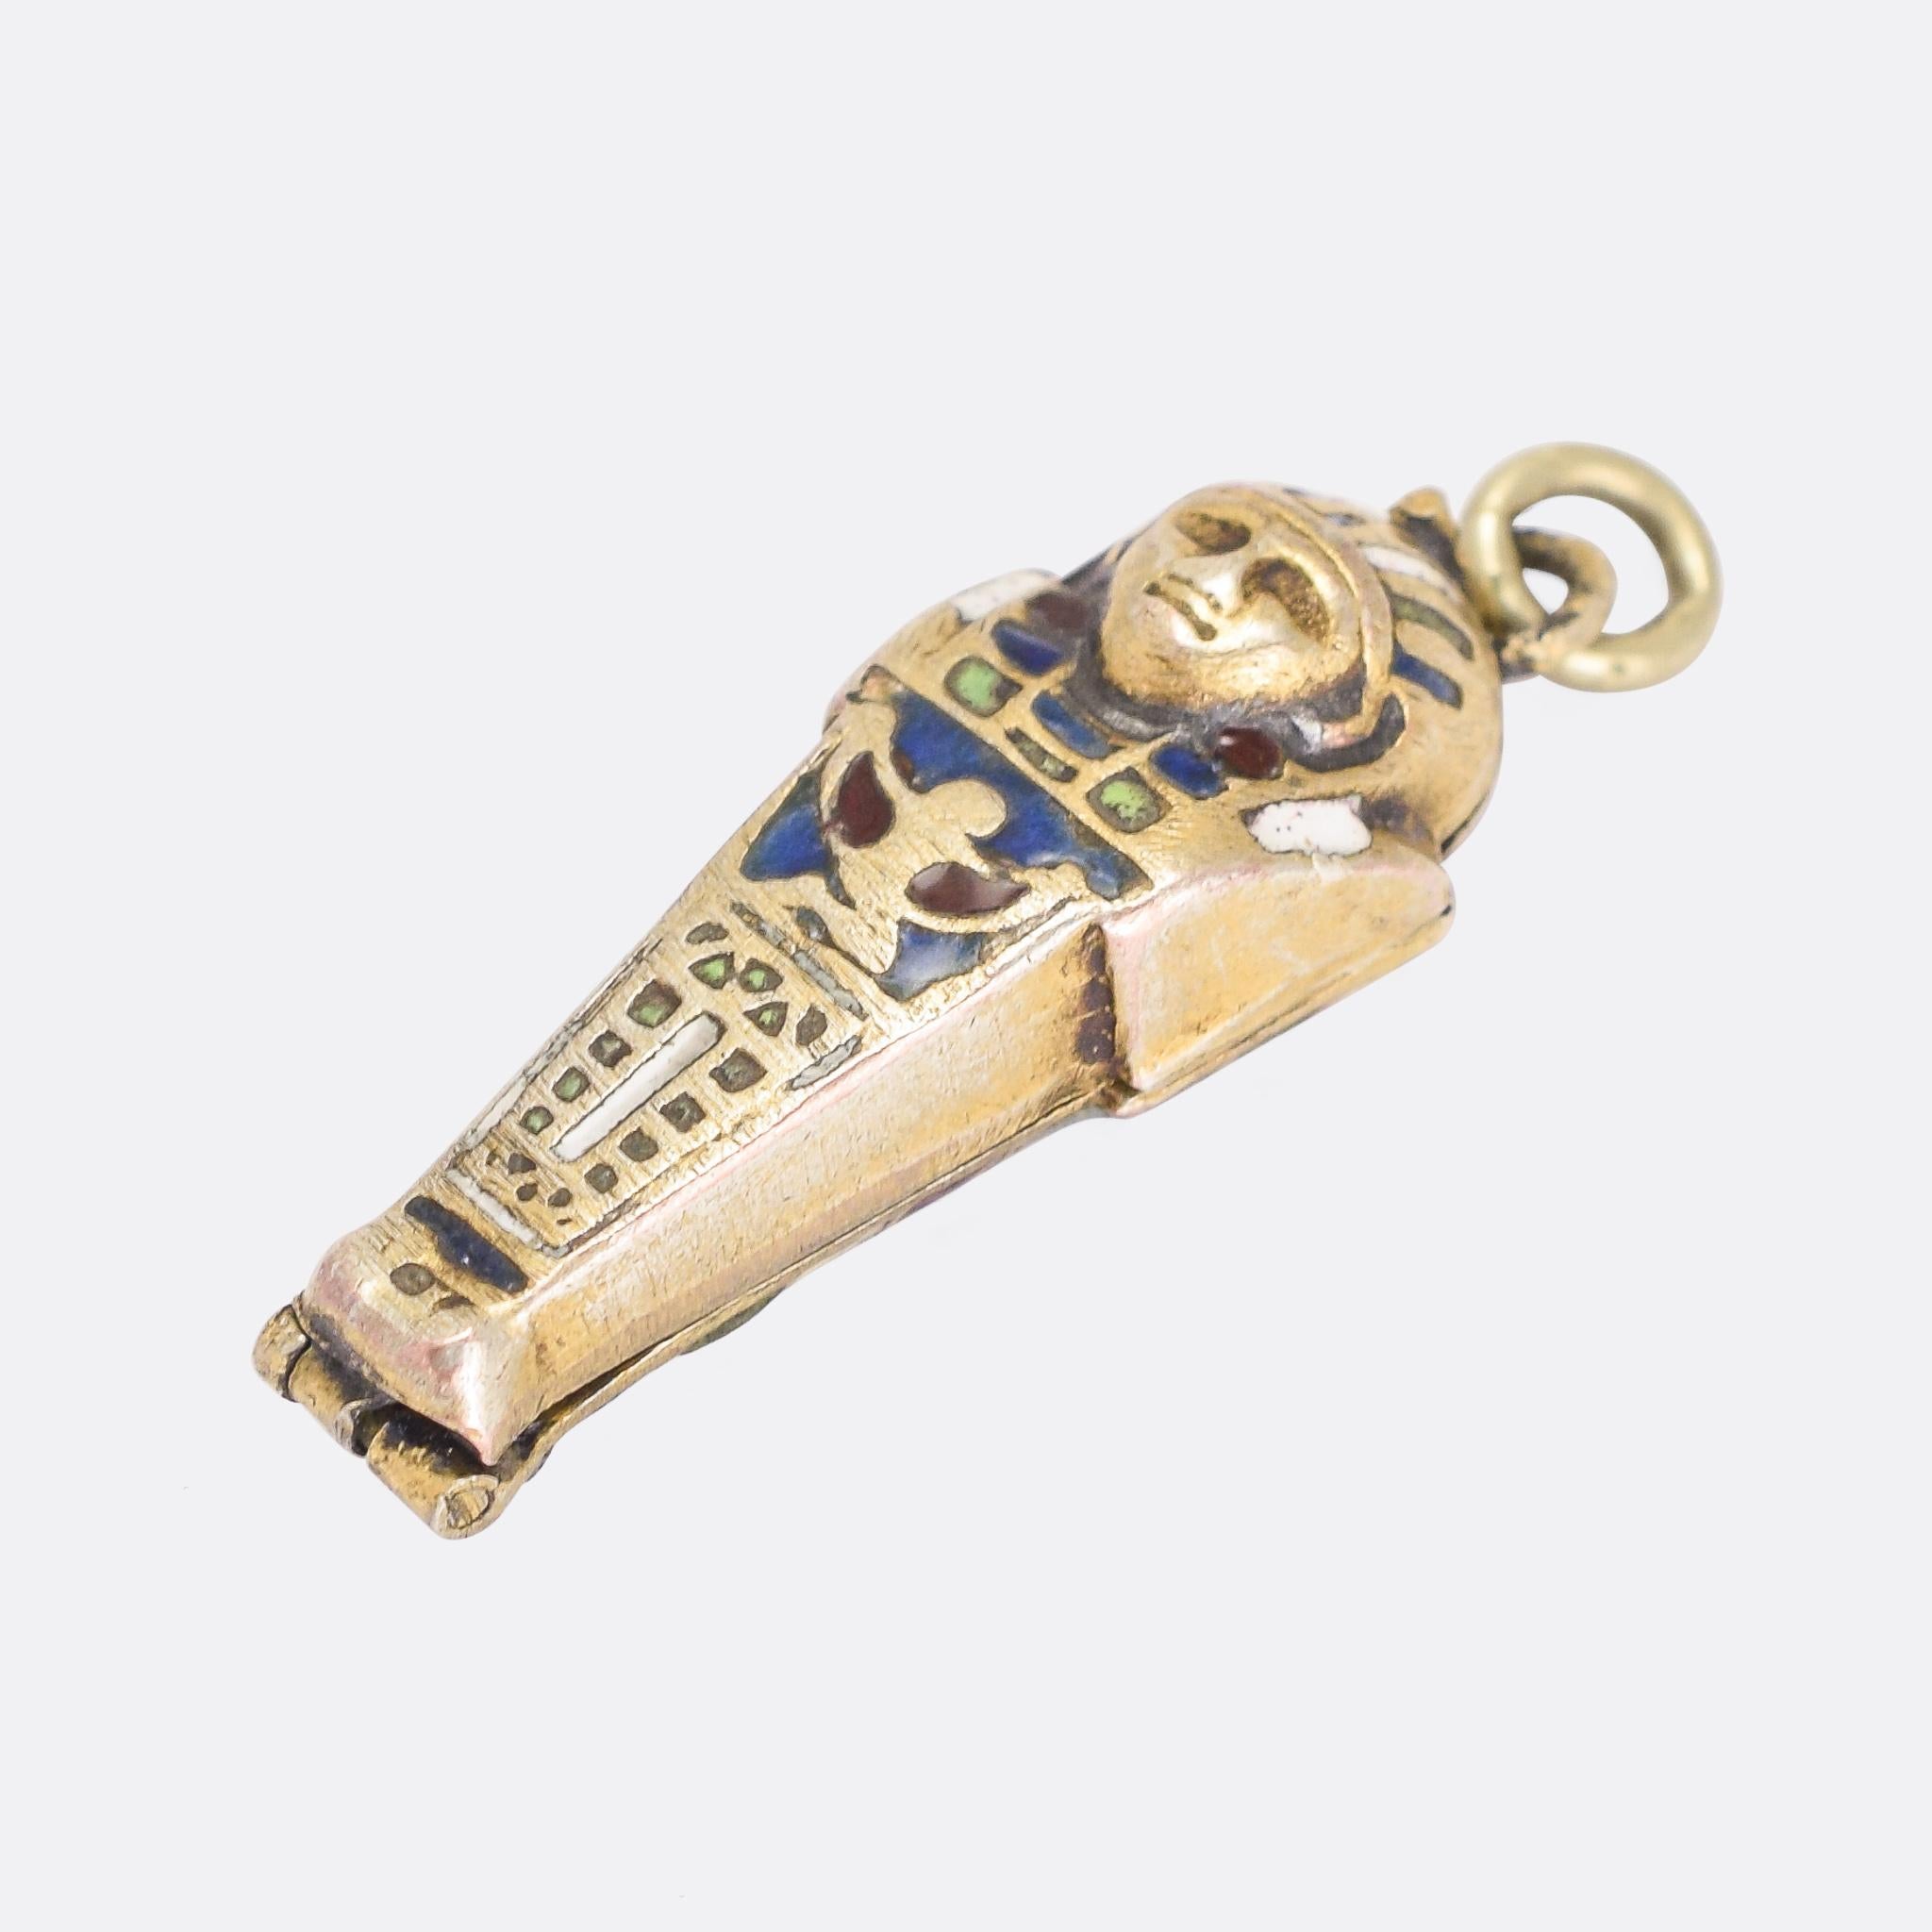 A cool 1920s Egyptian revival sarcophagus pendant that opens to reveal mummy inside. It's modelled in silver gilt, and finished in colourful enamel. Well detailed, and likely of Egyptian origin.

MEASUREMENTS 
3.2 x 1.1cm

WEIGHT 
4.3g

MARKS 
No